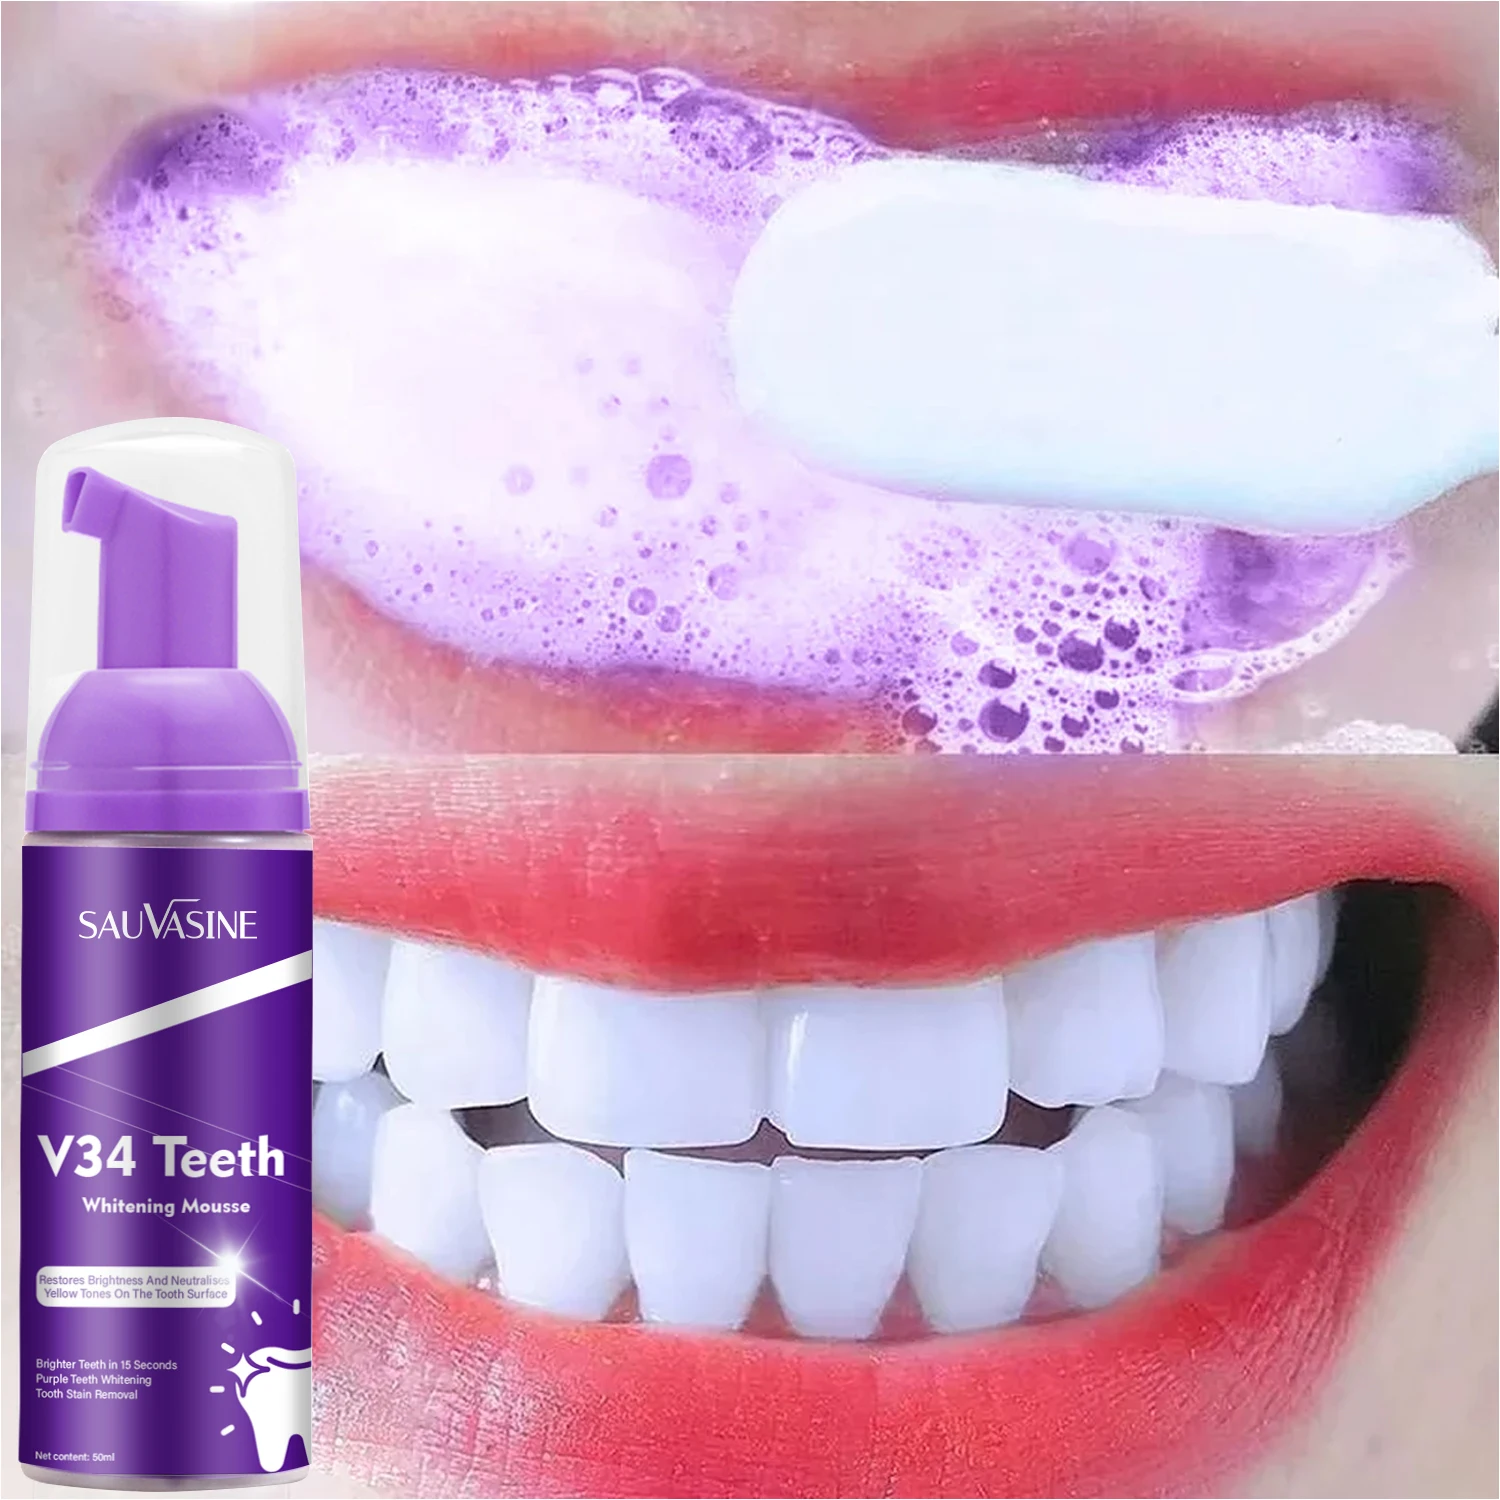 Teeth Whitening Product Effectively Remove Yellow Teeth Smoke Stain Remover Oral Hygiene Clean Dental Plaque Fresh Breath teeth whitening serum oral hygiene cleaning effectively remove plaque stains yellow teeth fresh breath whitener dental care tool